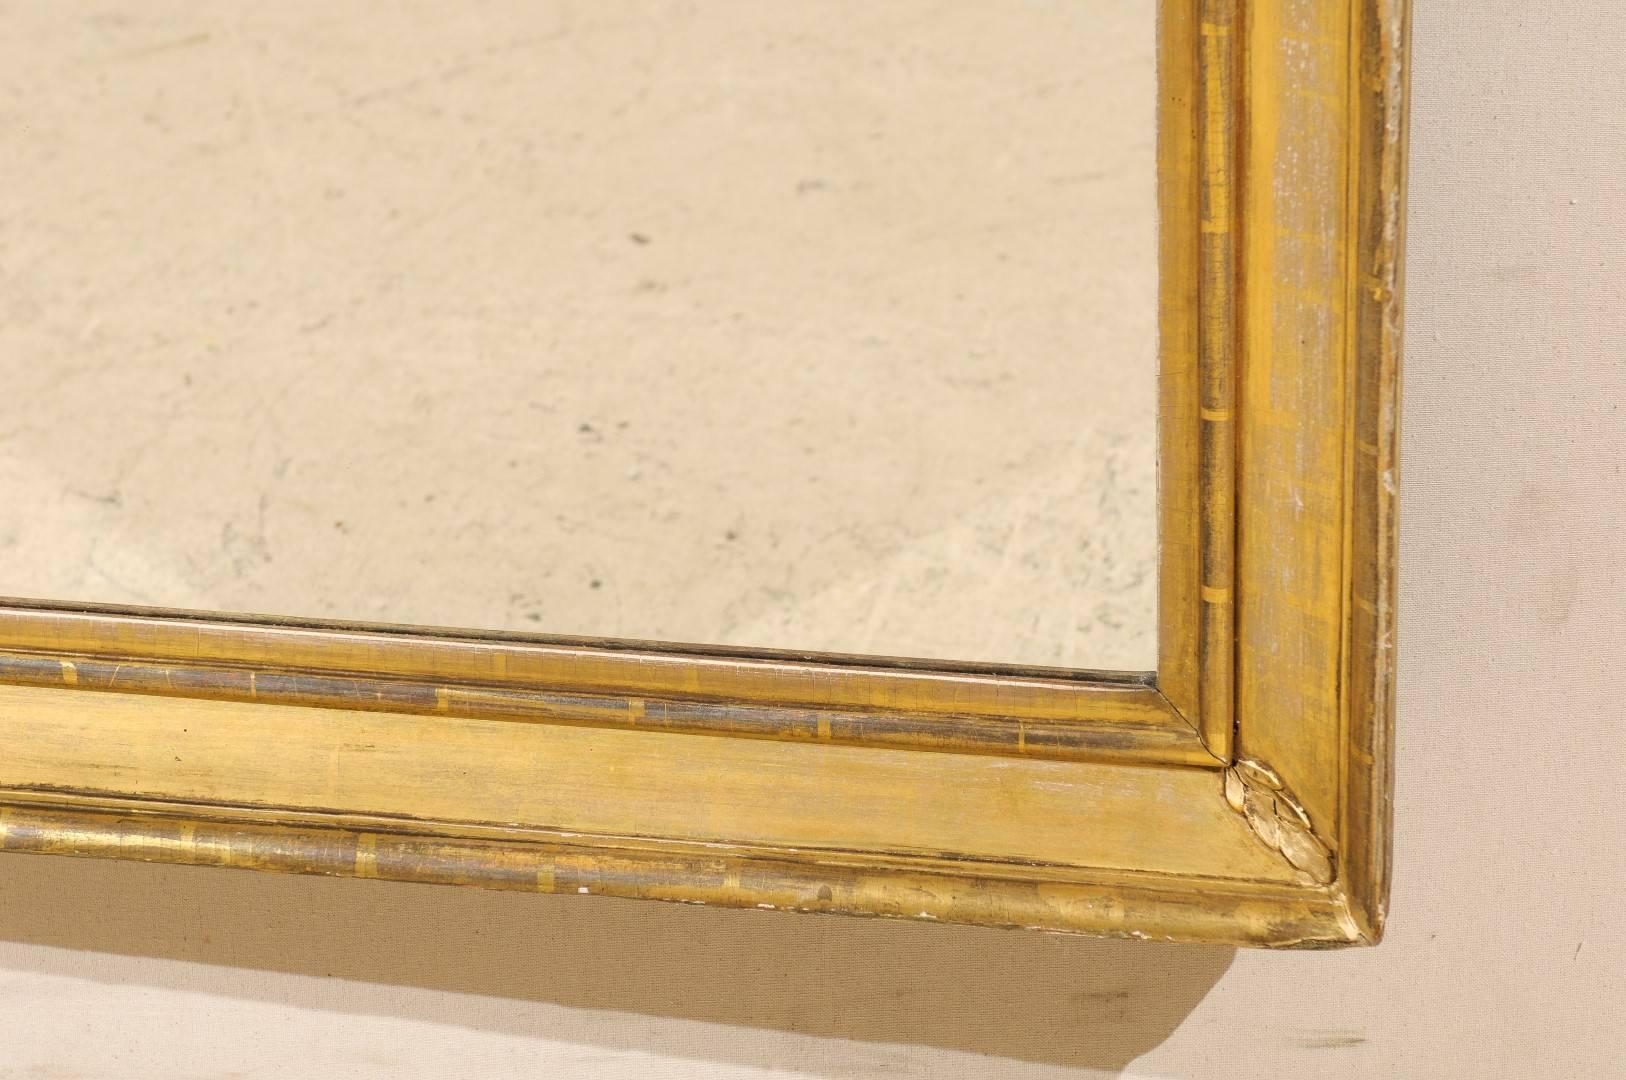 19th Century French Gilt Wood Mirror with Diagonal Leaf Motifs and Gold Color 4